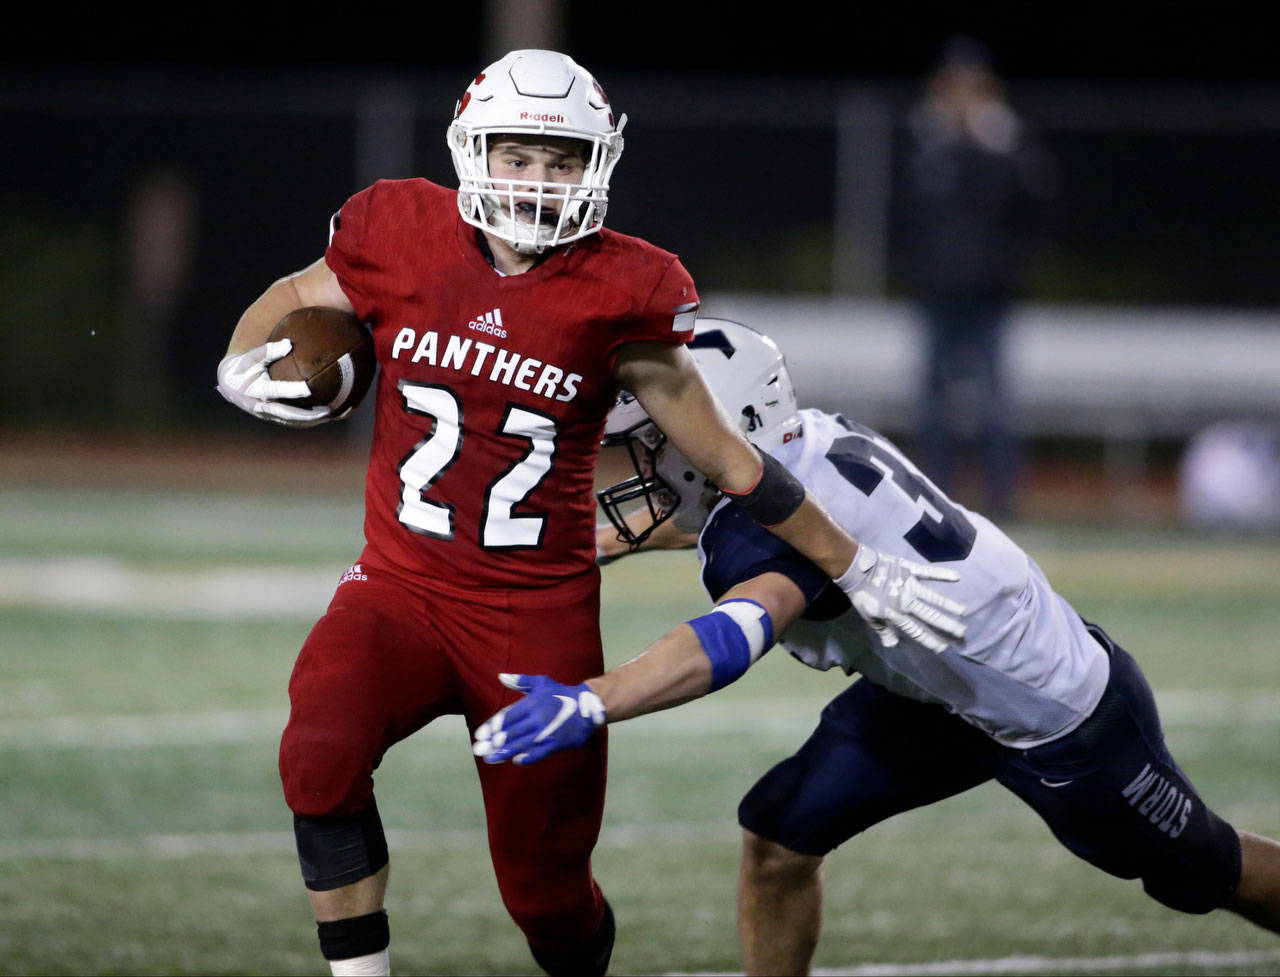 Snohomish’s Tyler Larson pushes off an opponent during Snohomish’s 30-27 win over Squalicum at Veterans Memorial Stadium on Oct. 26, 2018 in Snohomish. Tha Panthers enter the season as a the favorite to win the conference. (Andy Bronson / The Herald)